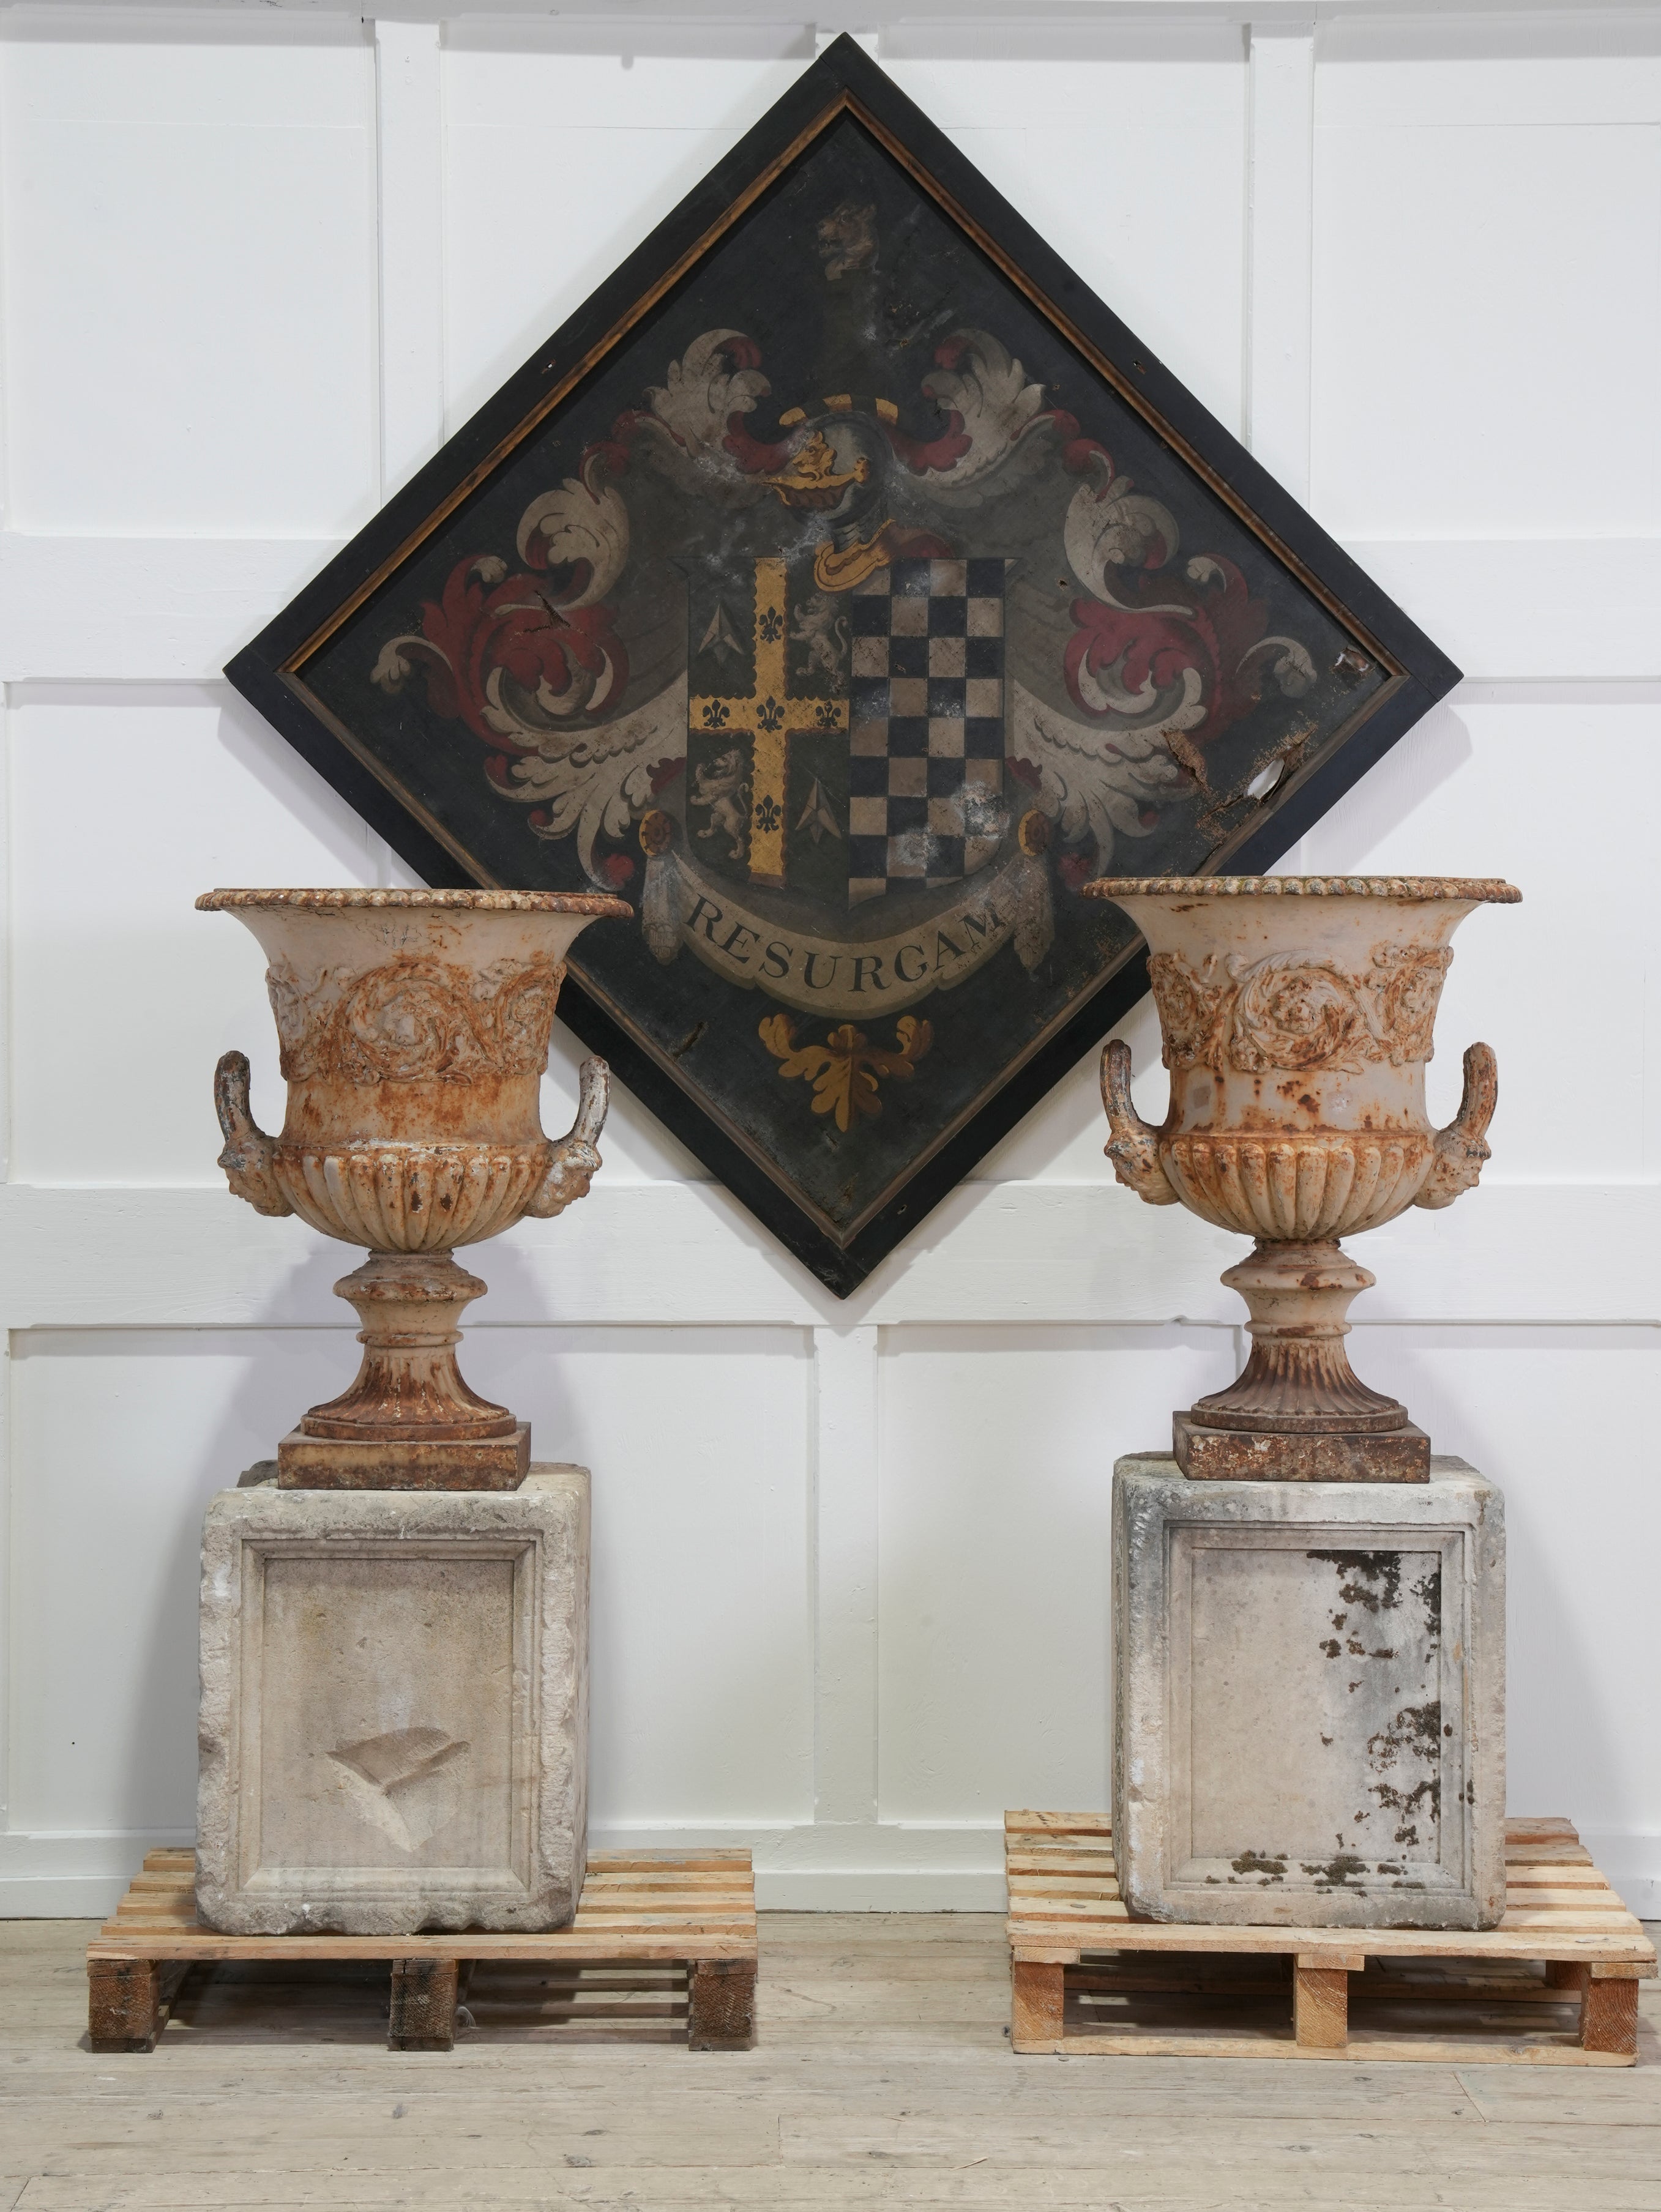 A Pair of Handyside Urns on Stone Pedestals